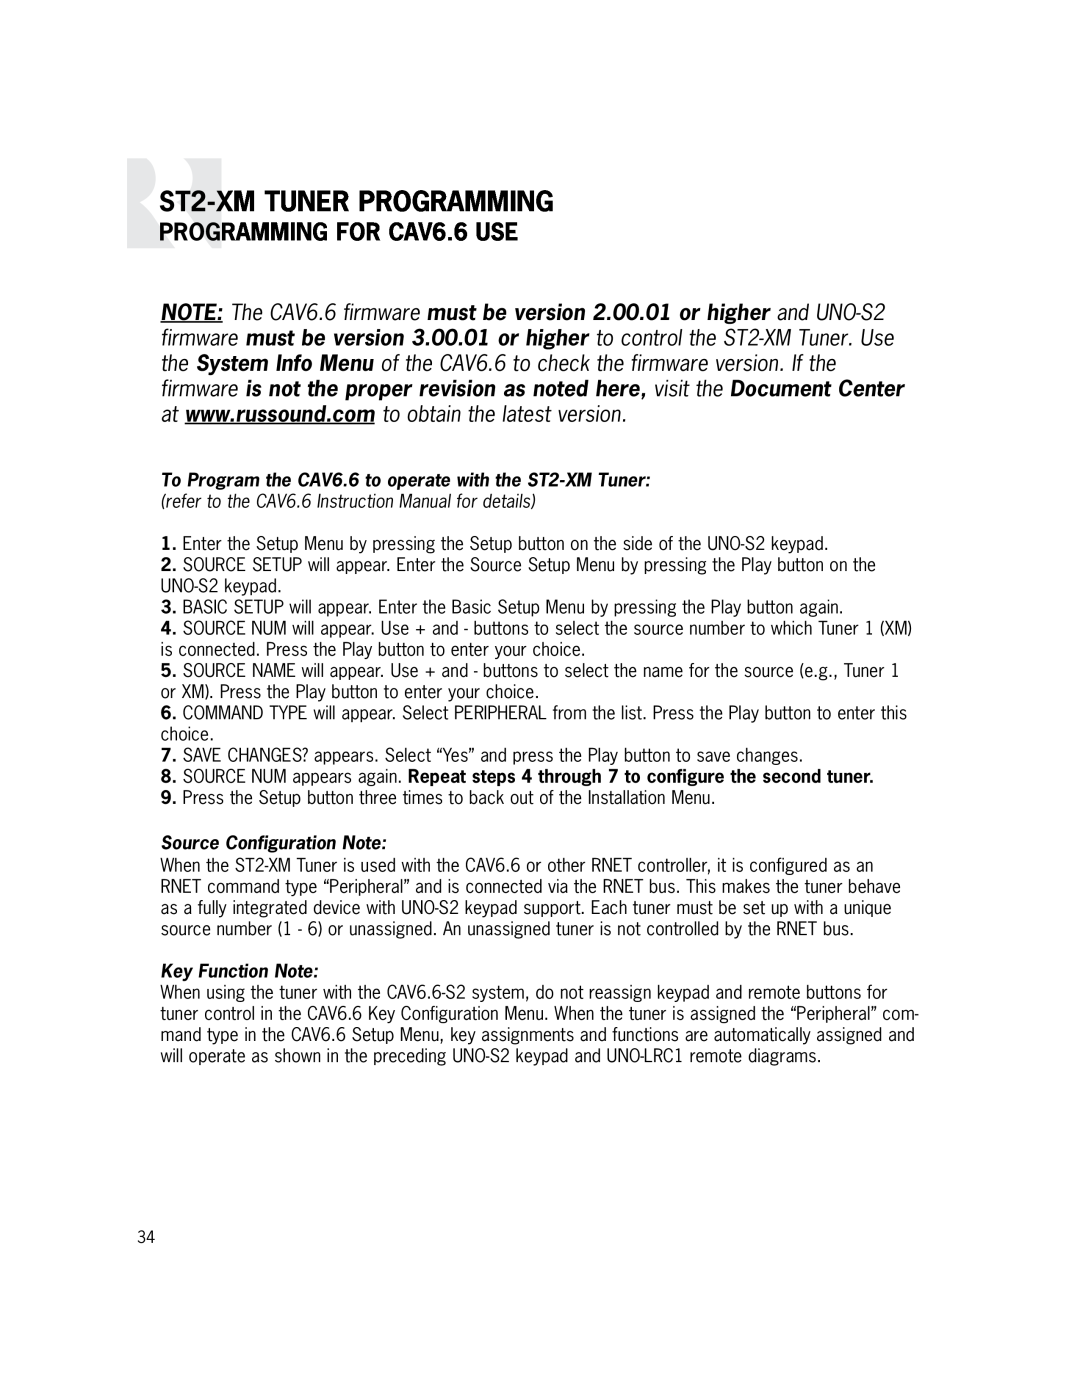 Russound manual PROGRAMMING FOR CAV6.6 USE, Source Configuration Note, Key Function Note, ST2-XMTUNER PROGRAMMING 